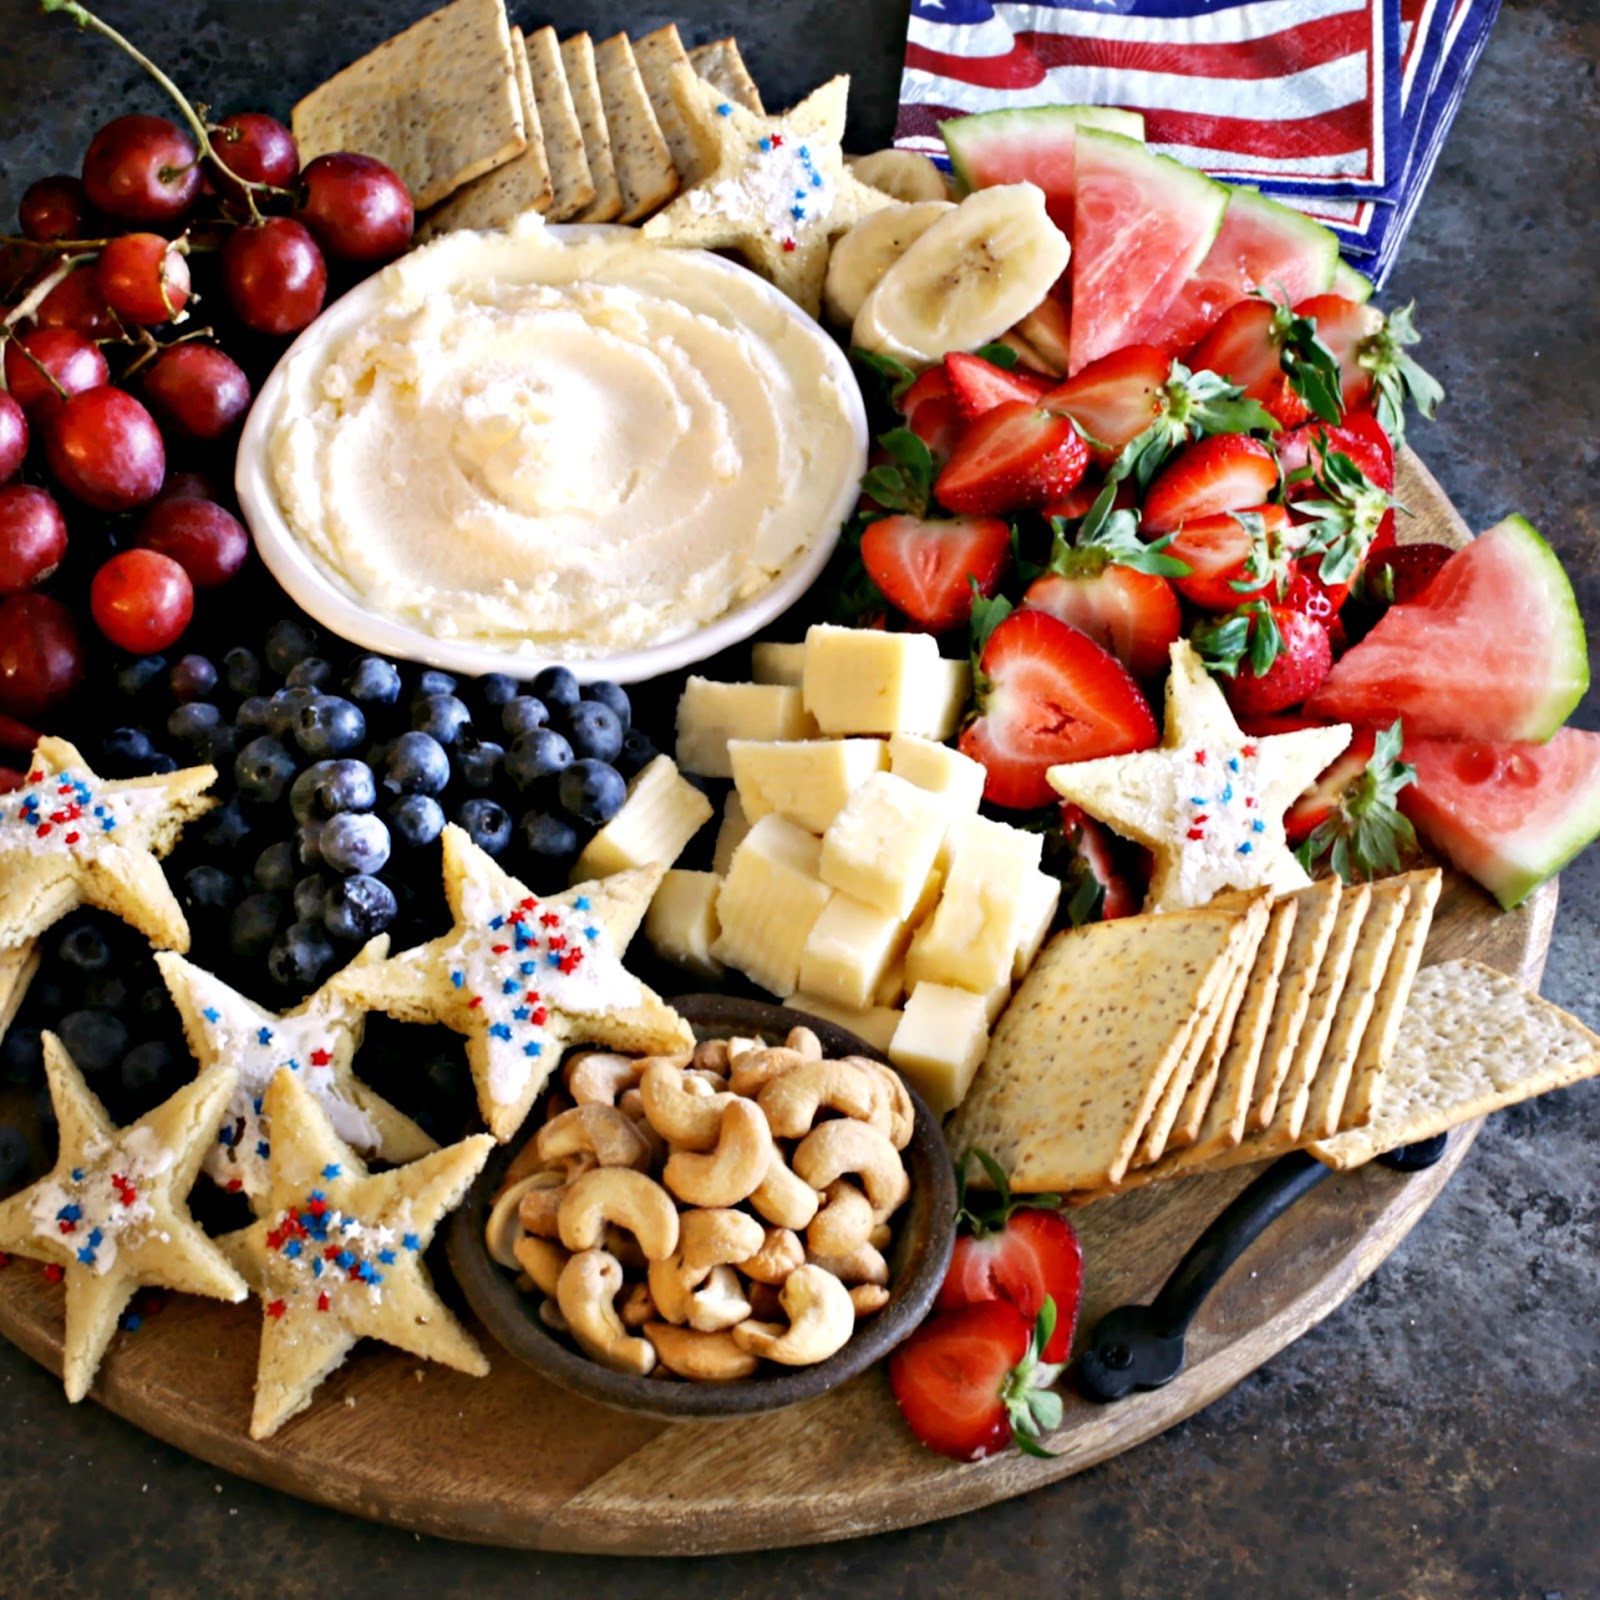 Patriotic themed charcuterie board with red, white and blue fruit and star shaped cookies.